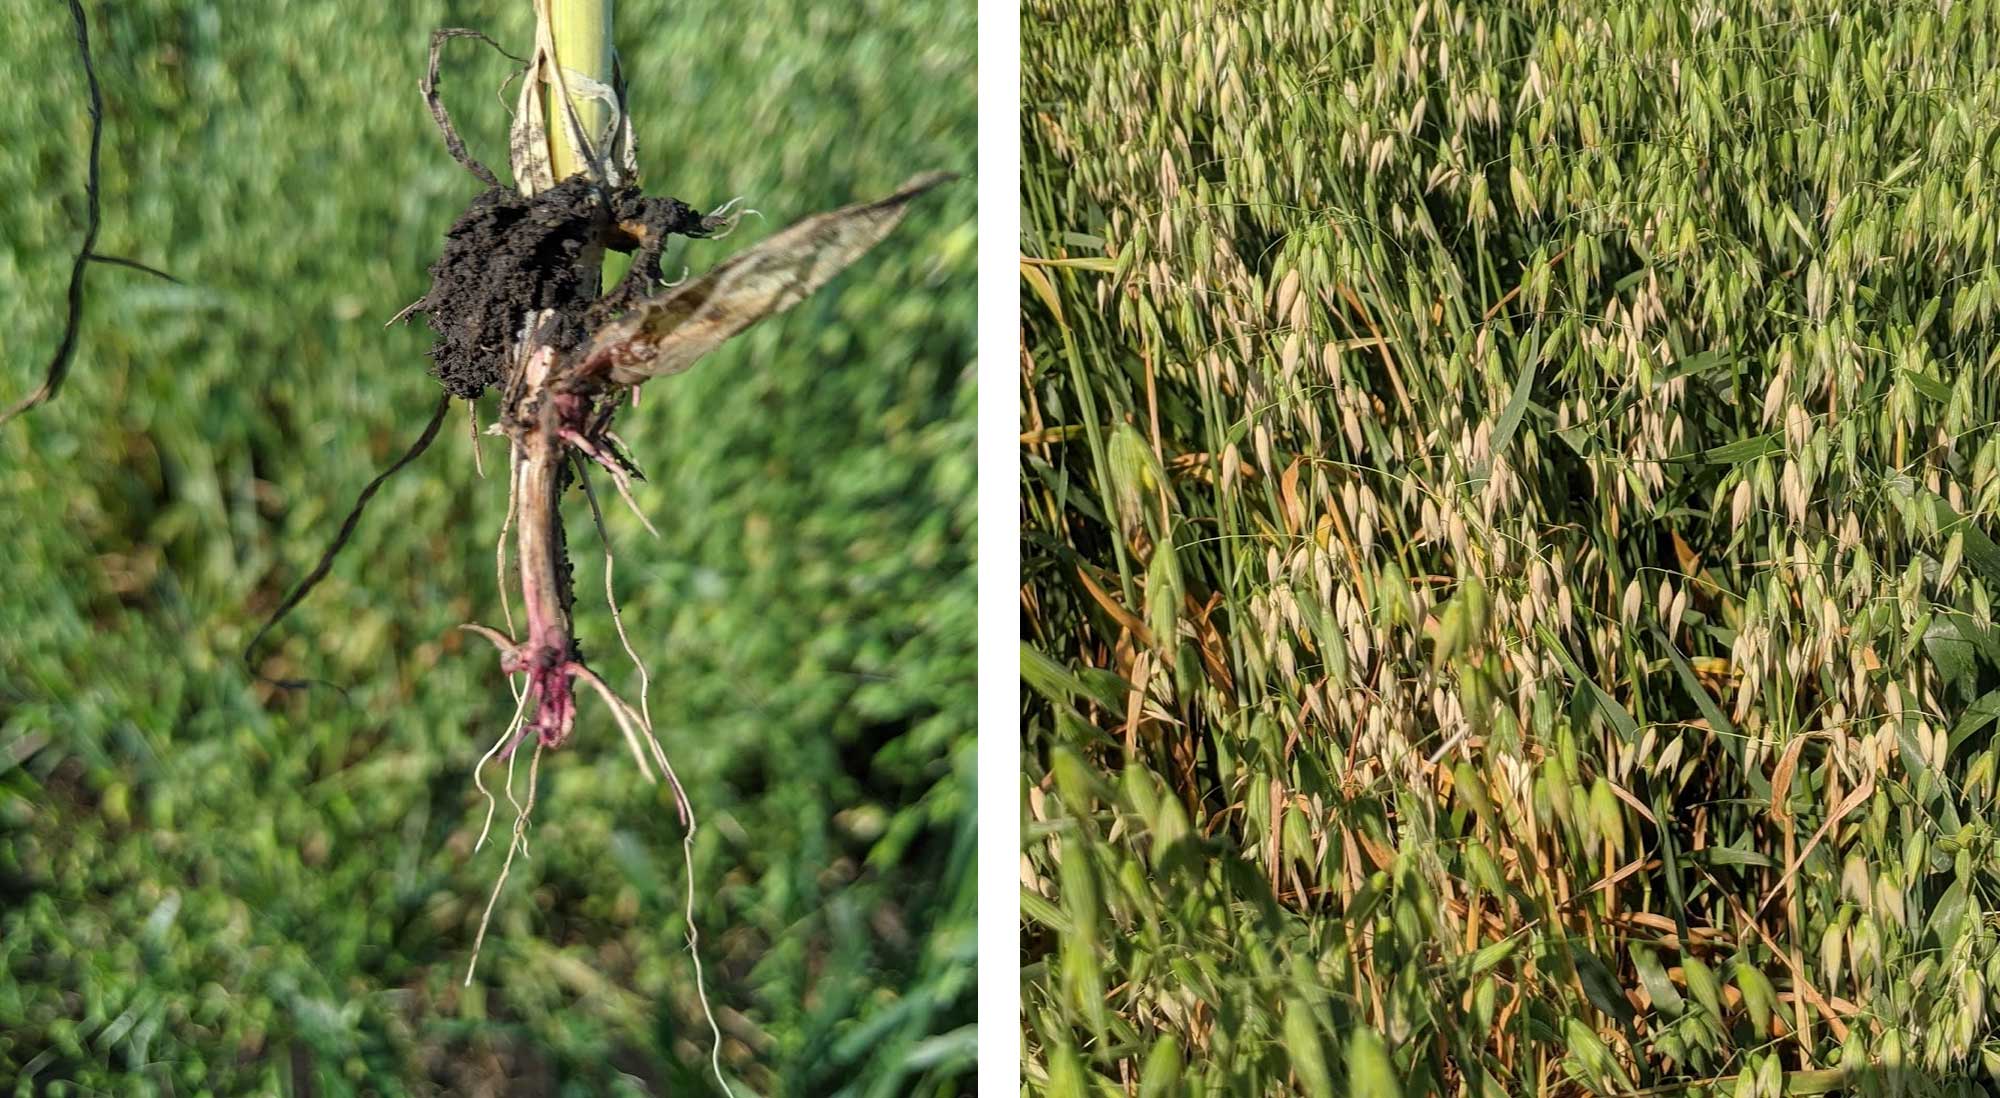 Two photos of oat plants exhibiting fusarium root and crown rot. Left: An oat tiller with pinkish color on the crown and first node indicative of Fusarium root and crown rot. Right: Green oat plant with yellow, dry markings throughout indicative of Fusarium root and crown rot.